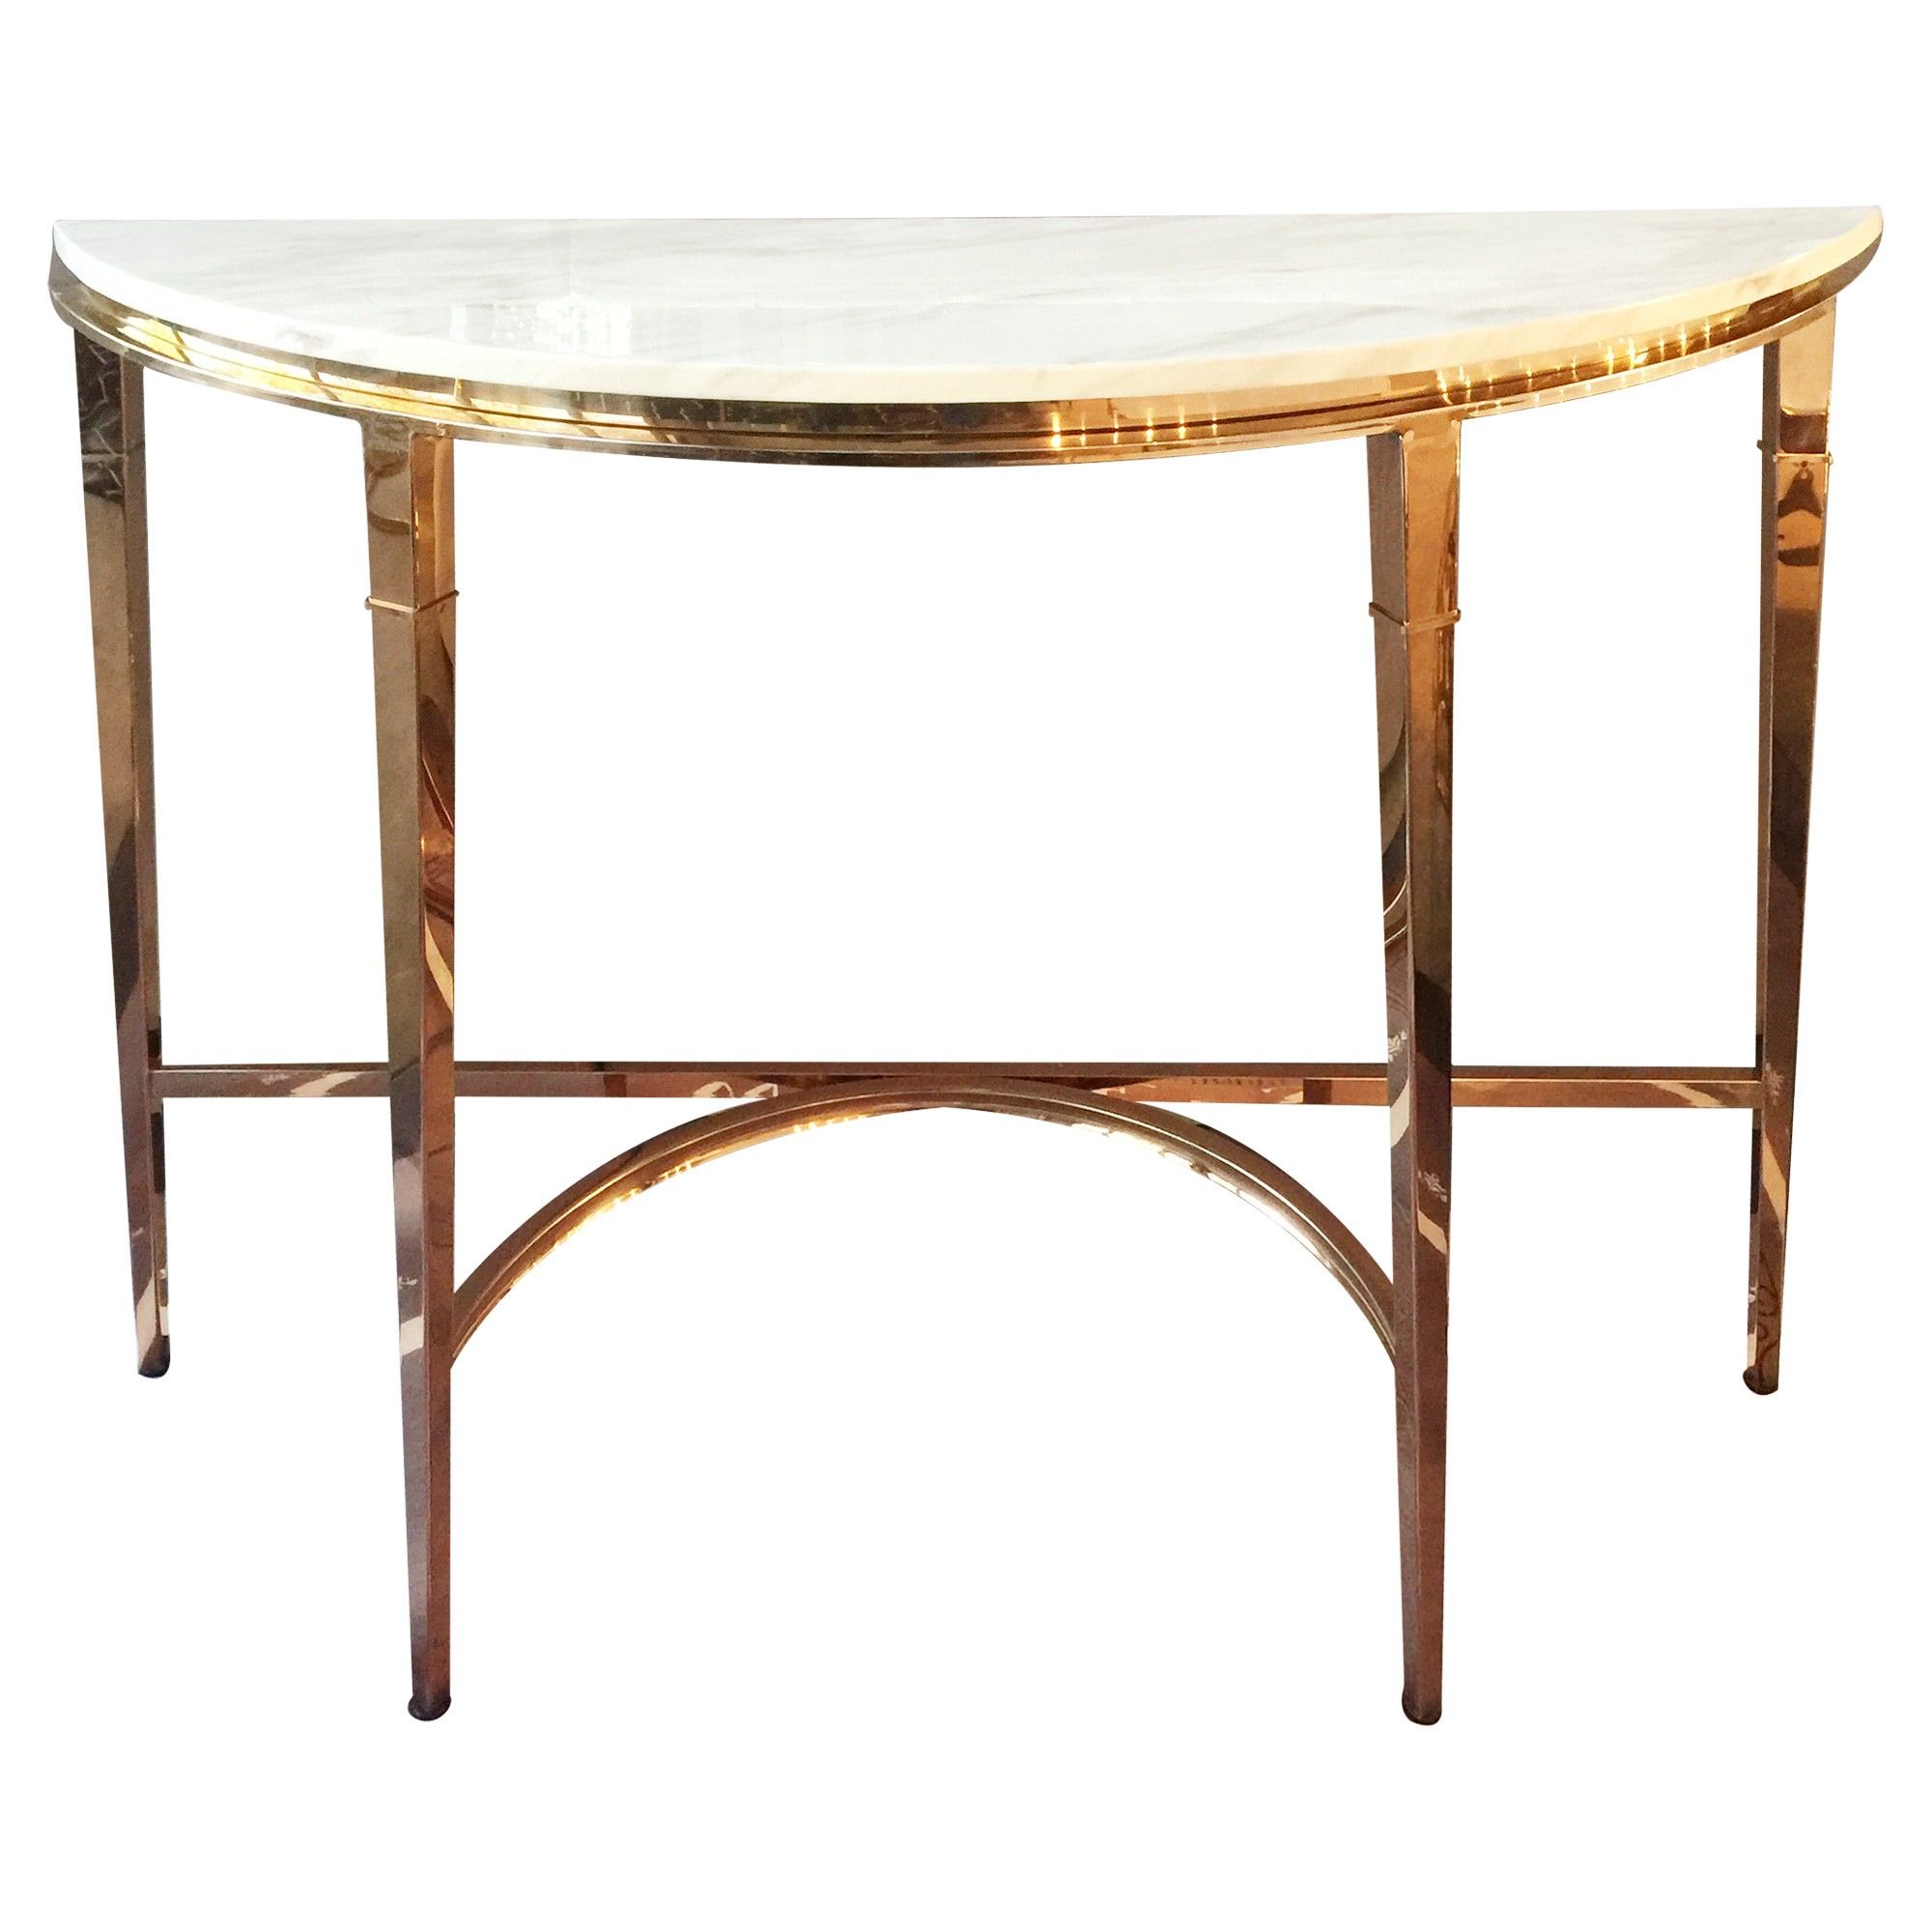 Mary Marble Topped Metal Semi Round Console Table, 130cm Intended For White Marble Gold Metal Console Tables (View 19 of 20)